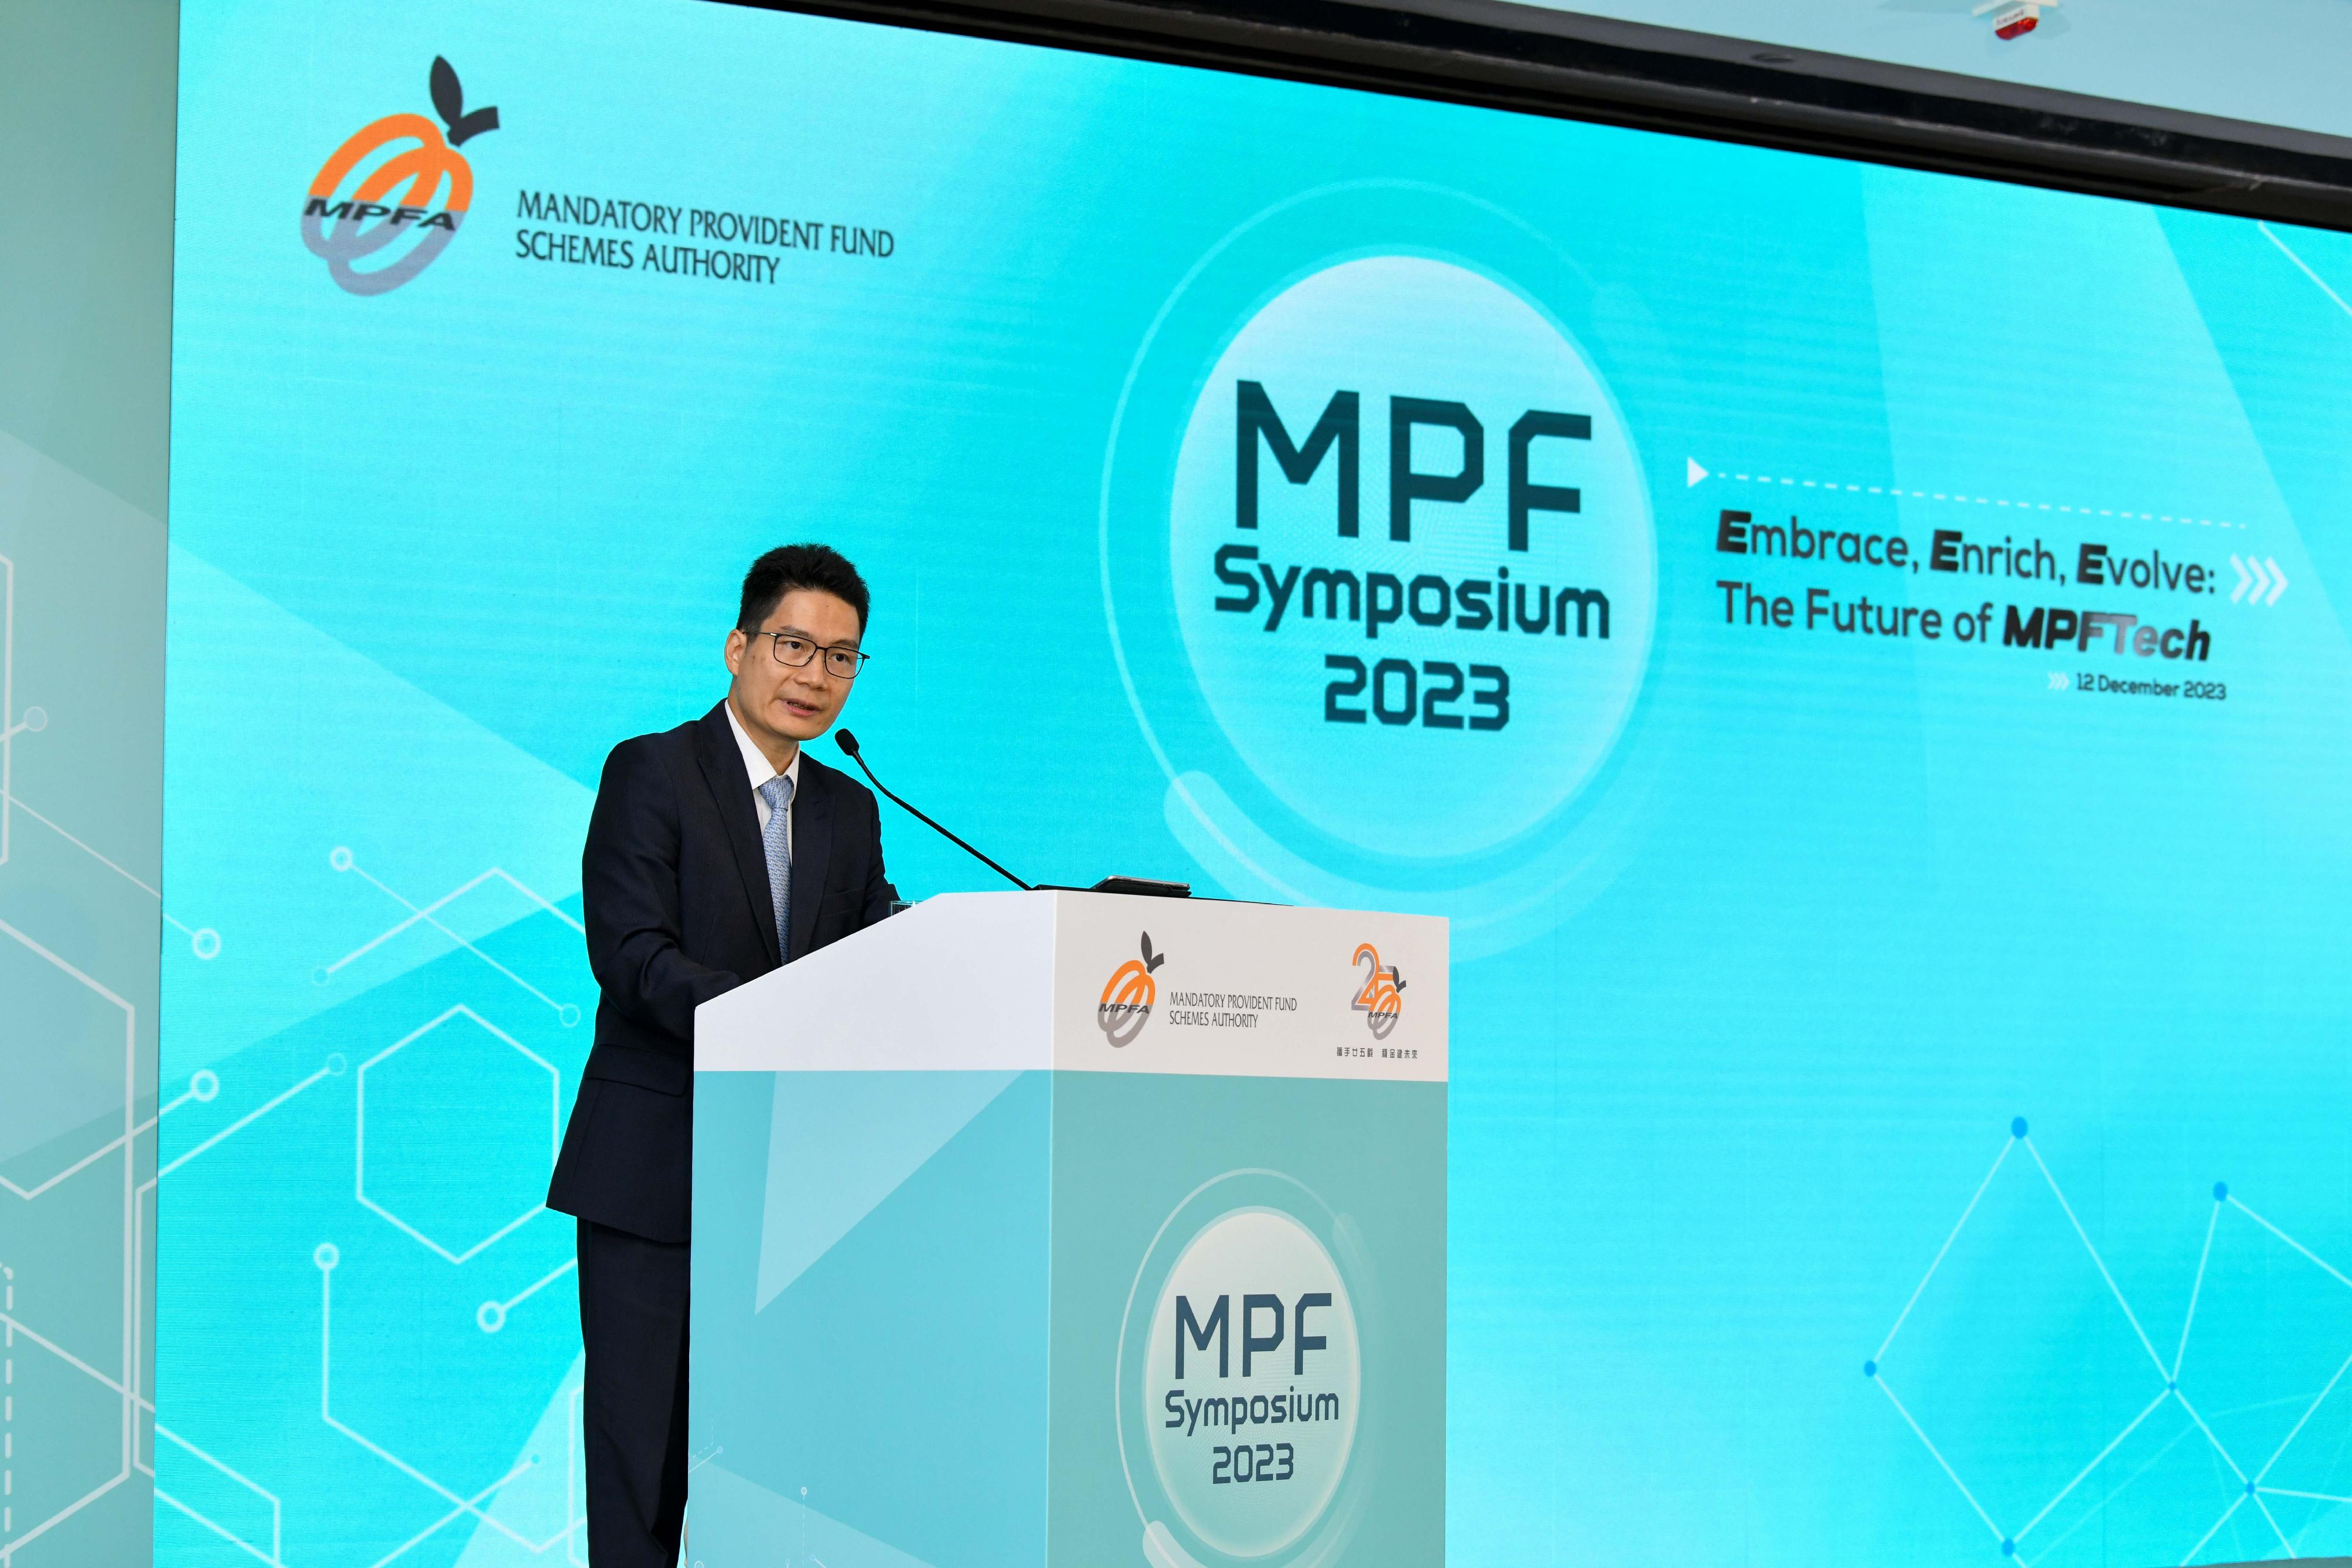 The Acting Secretary for Financial Services and the Treasury, Mr Joseph Chan, gives a keynote speech at the MPF Symposium 2023 today (December 12).